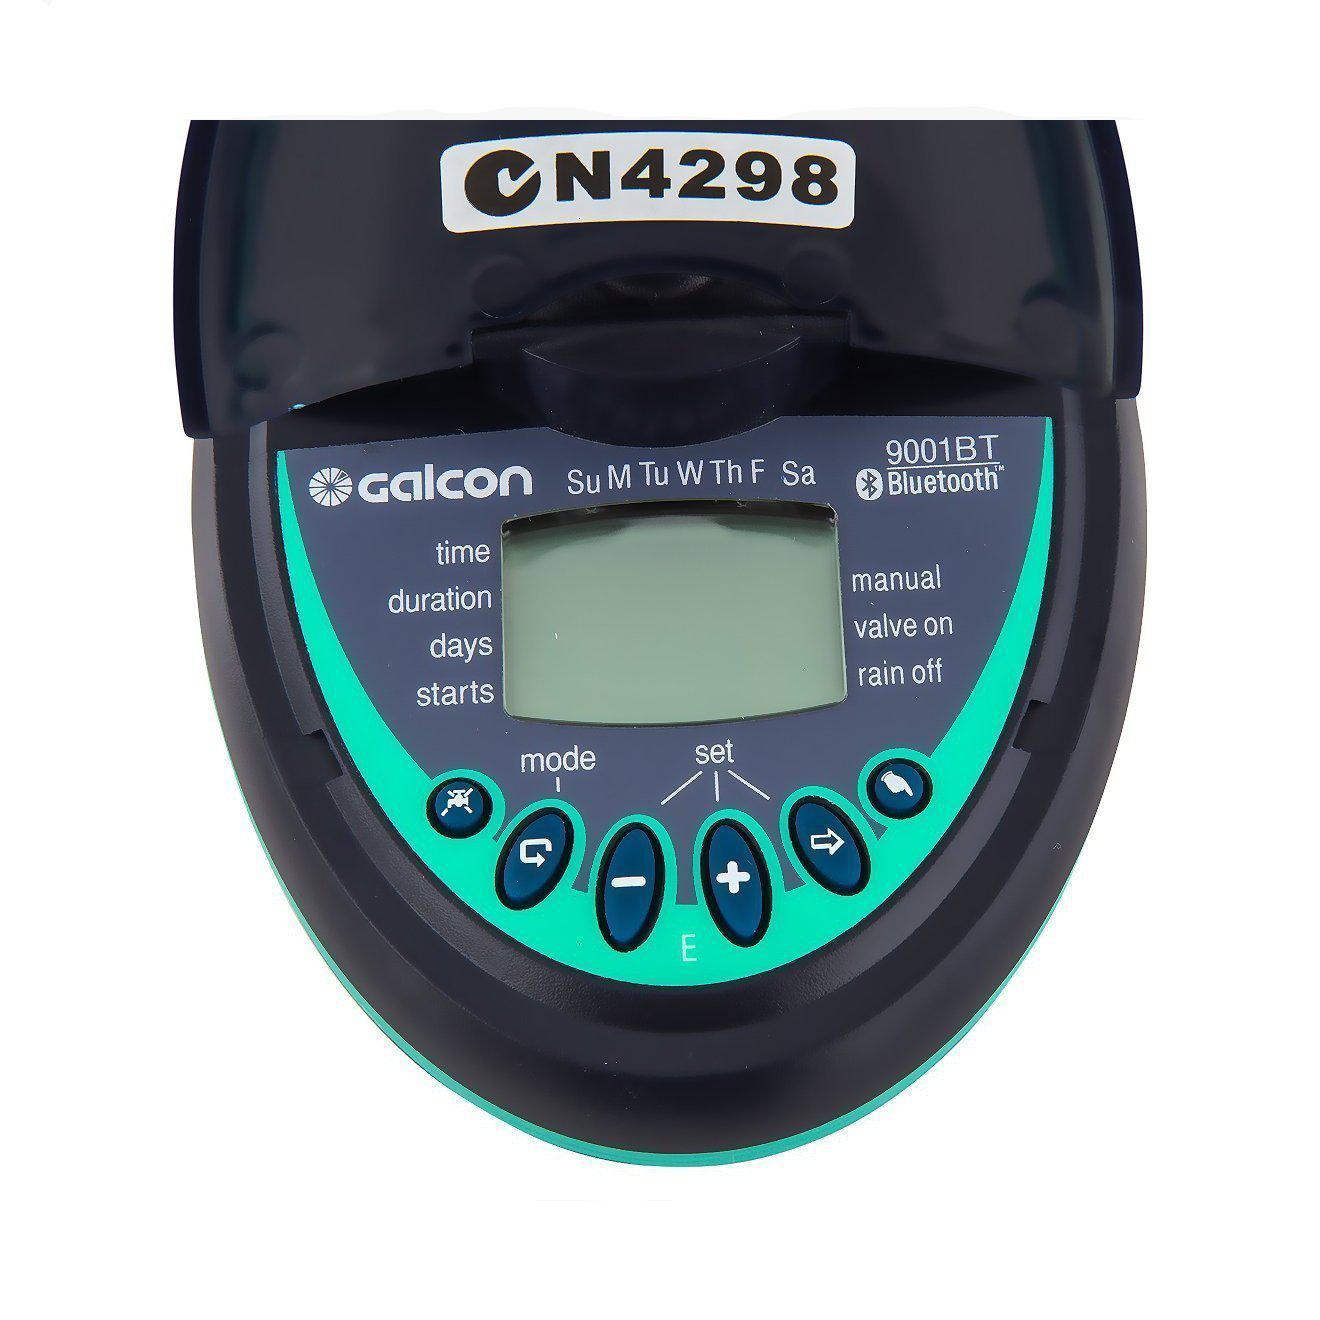 galcon water timers